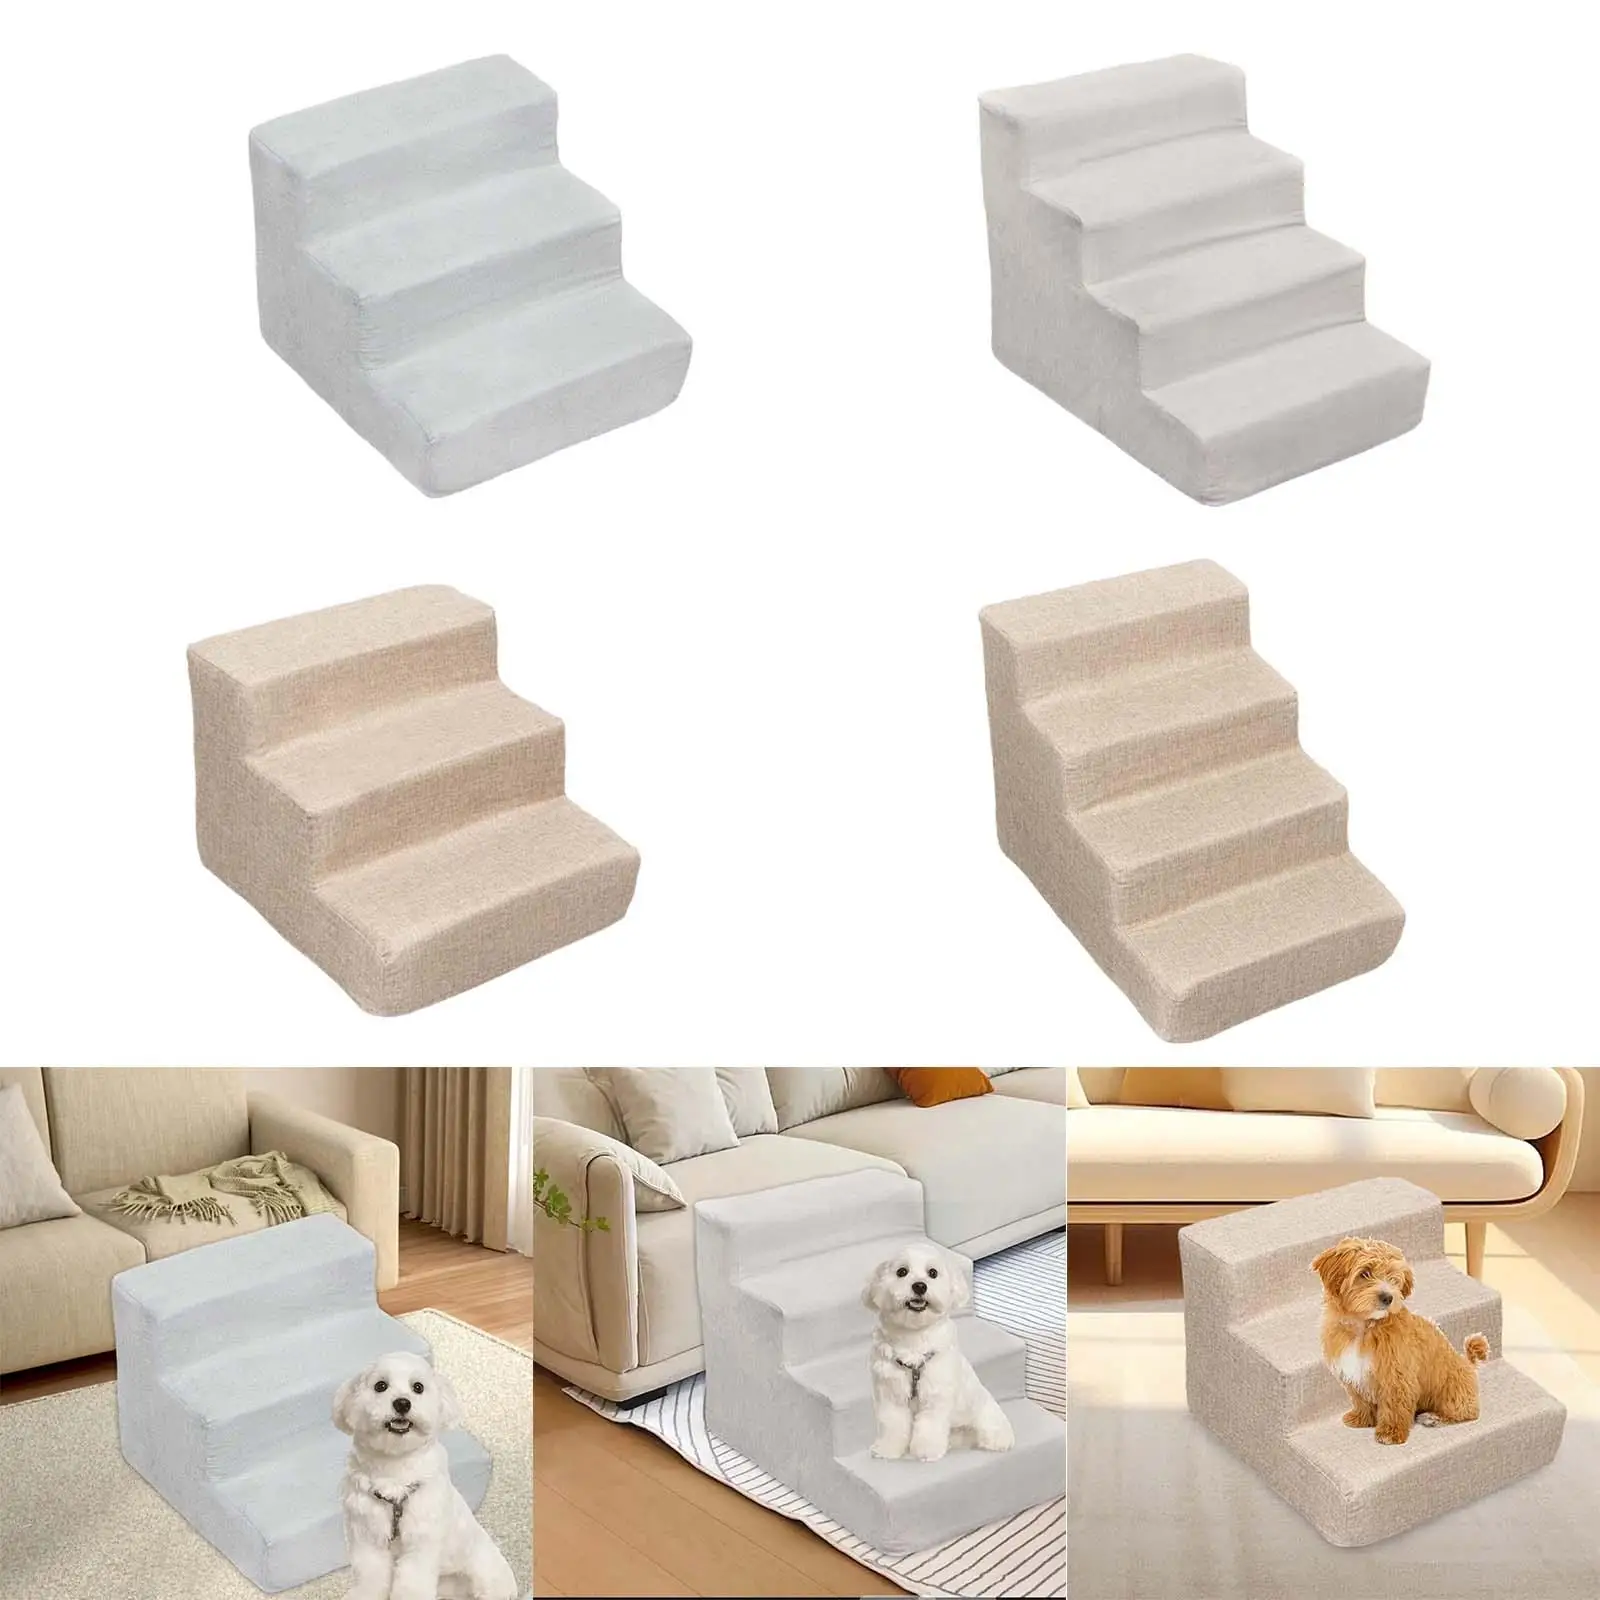 Dog Ramp Stable Comfortable Removable Cover Sturdy for Couch, Sofa, and High Bed Climbing Portable Anti Slip Versatile Pet Steps